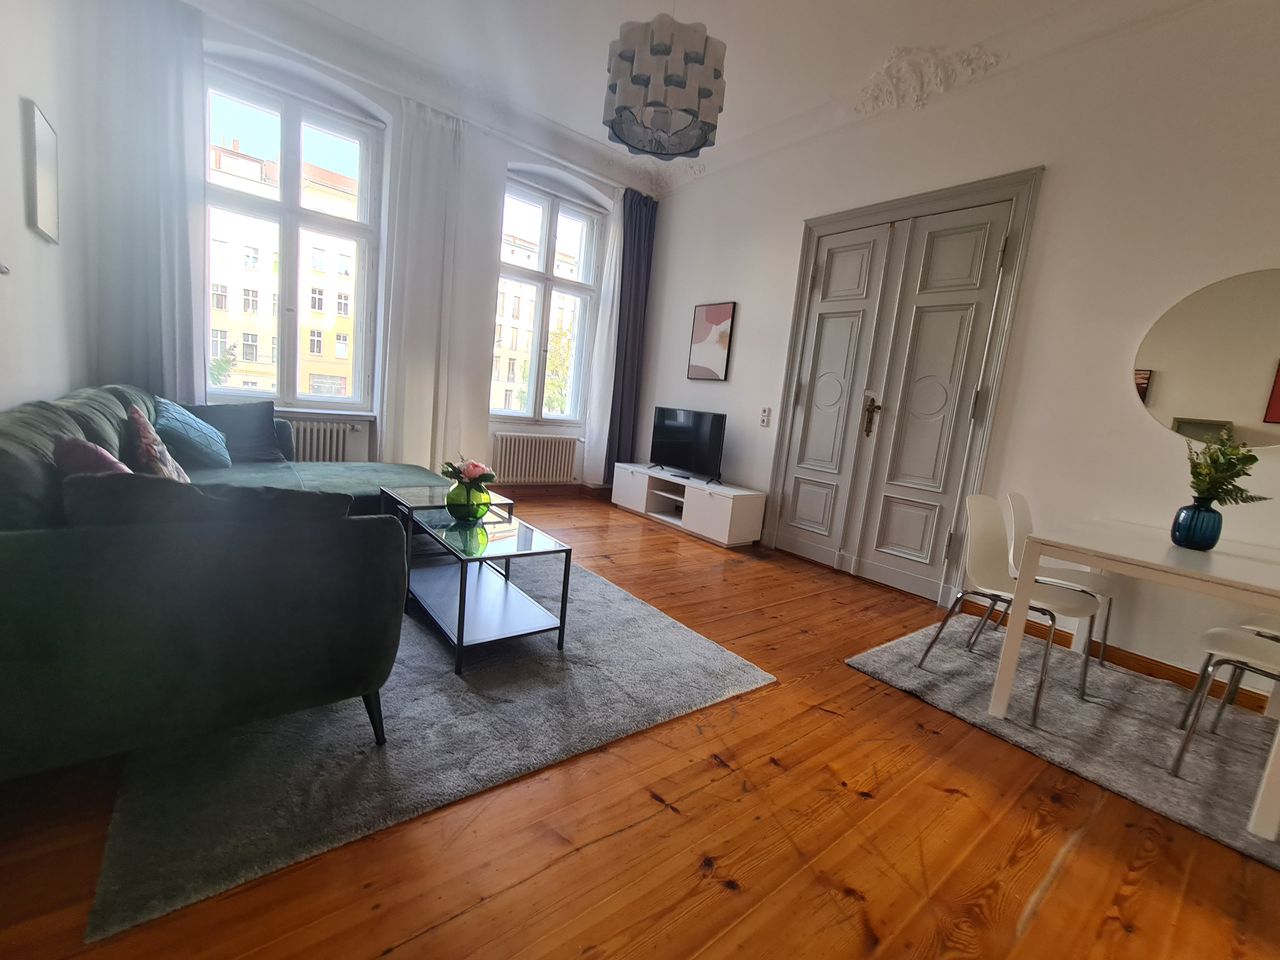 Amazing and fashionable home in the heart of Berlin (Prenzlauer Berg)